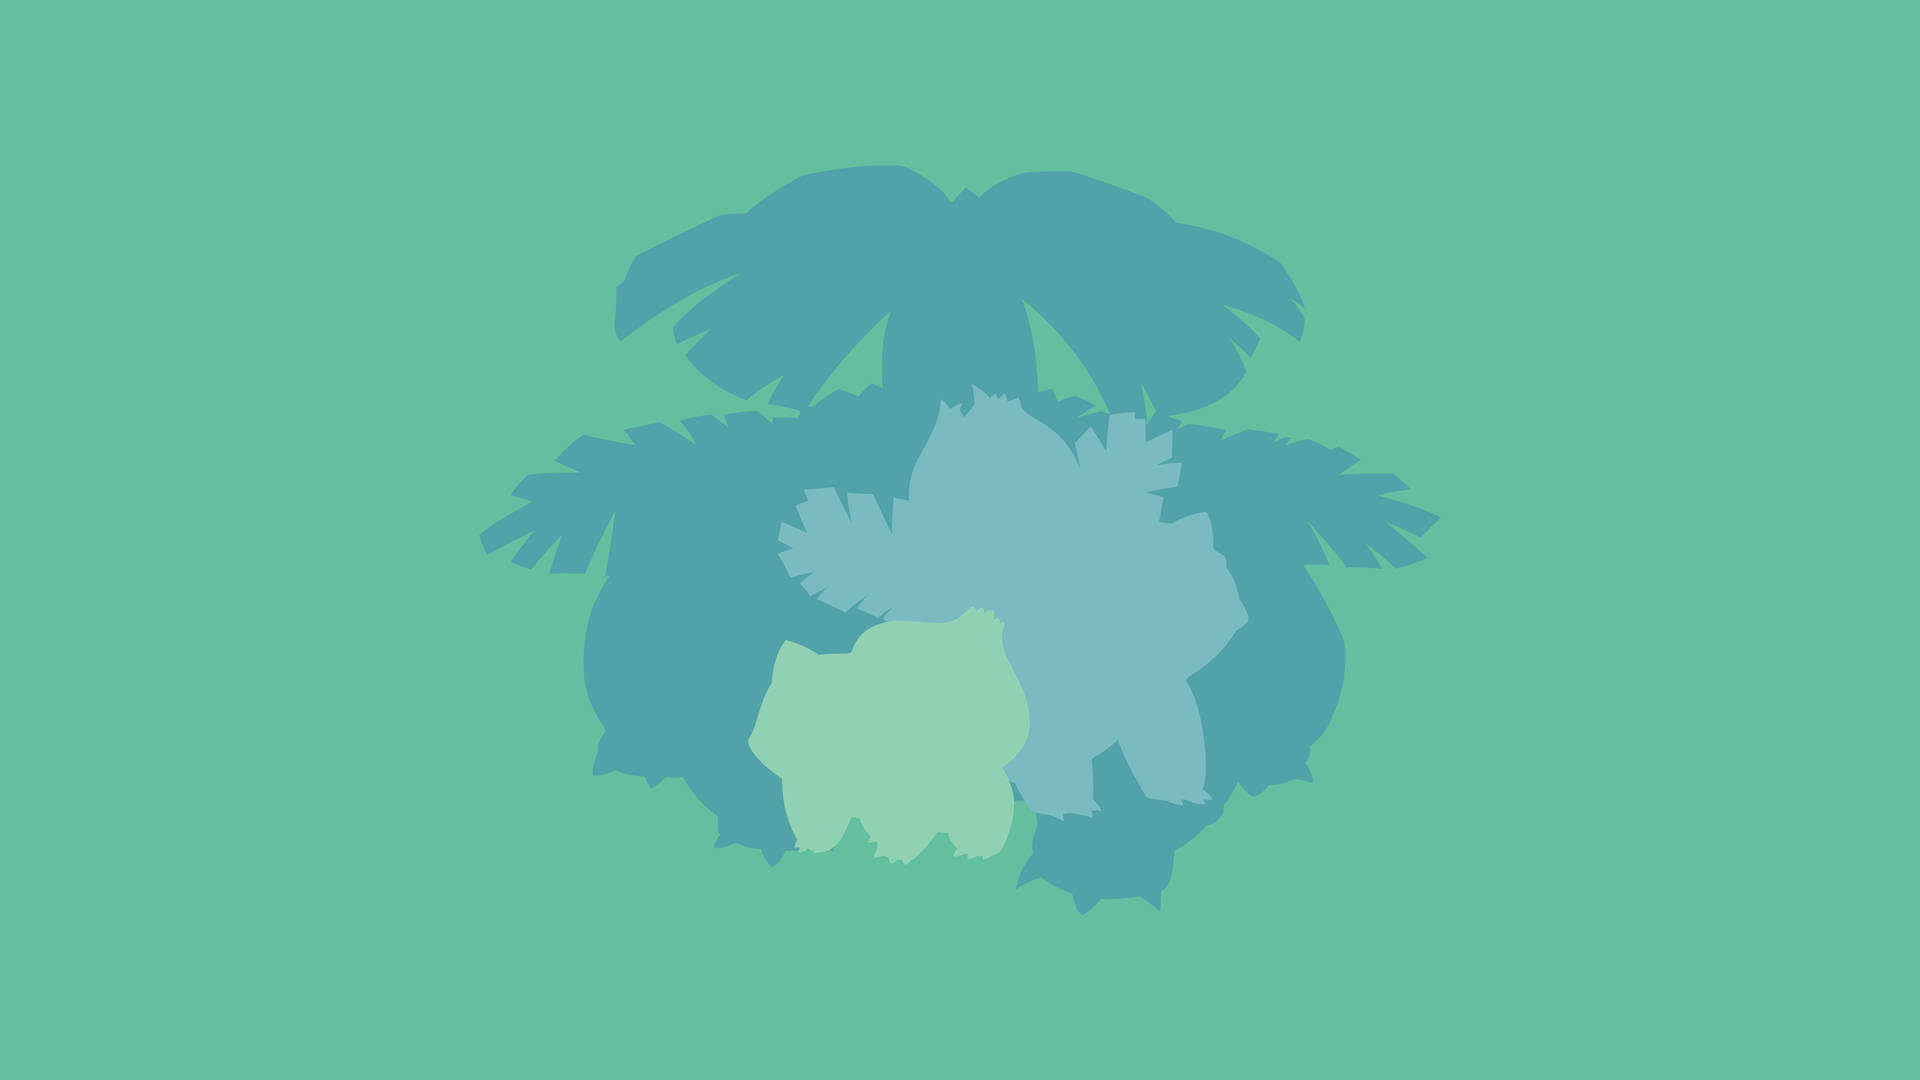 A Minimalist Look At The Power Of Bulbasaur's Evolution Background